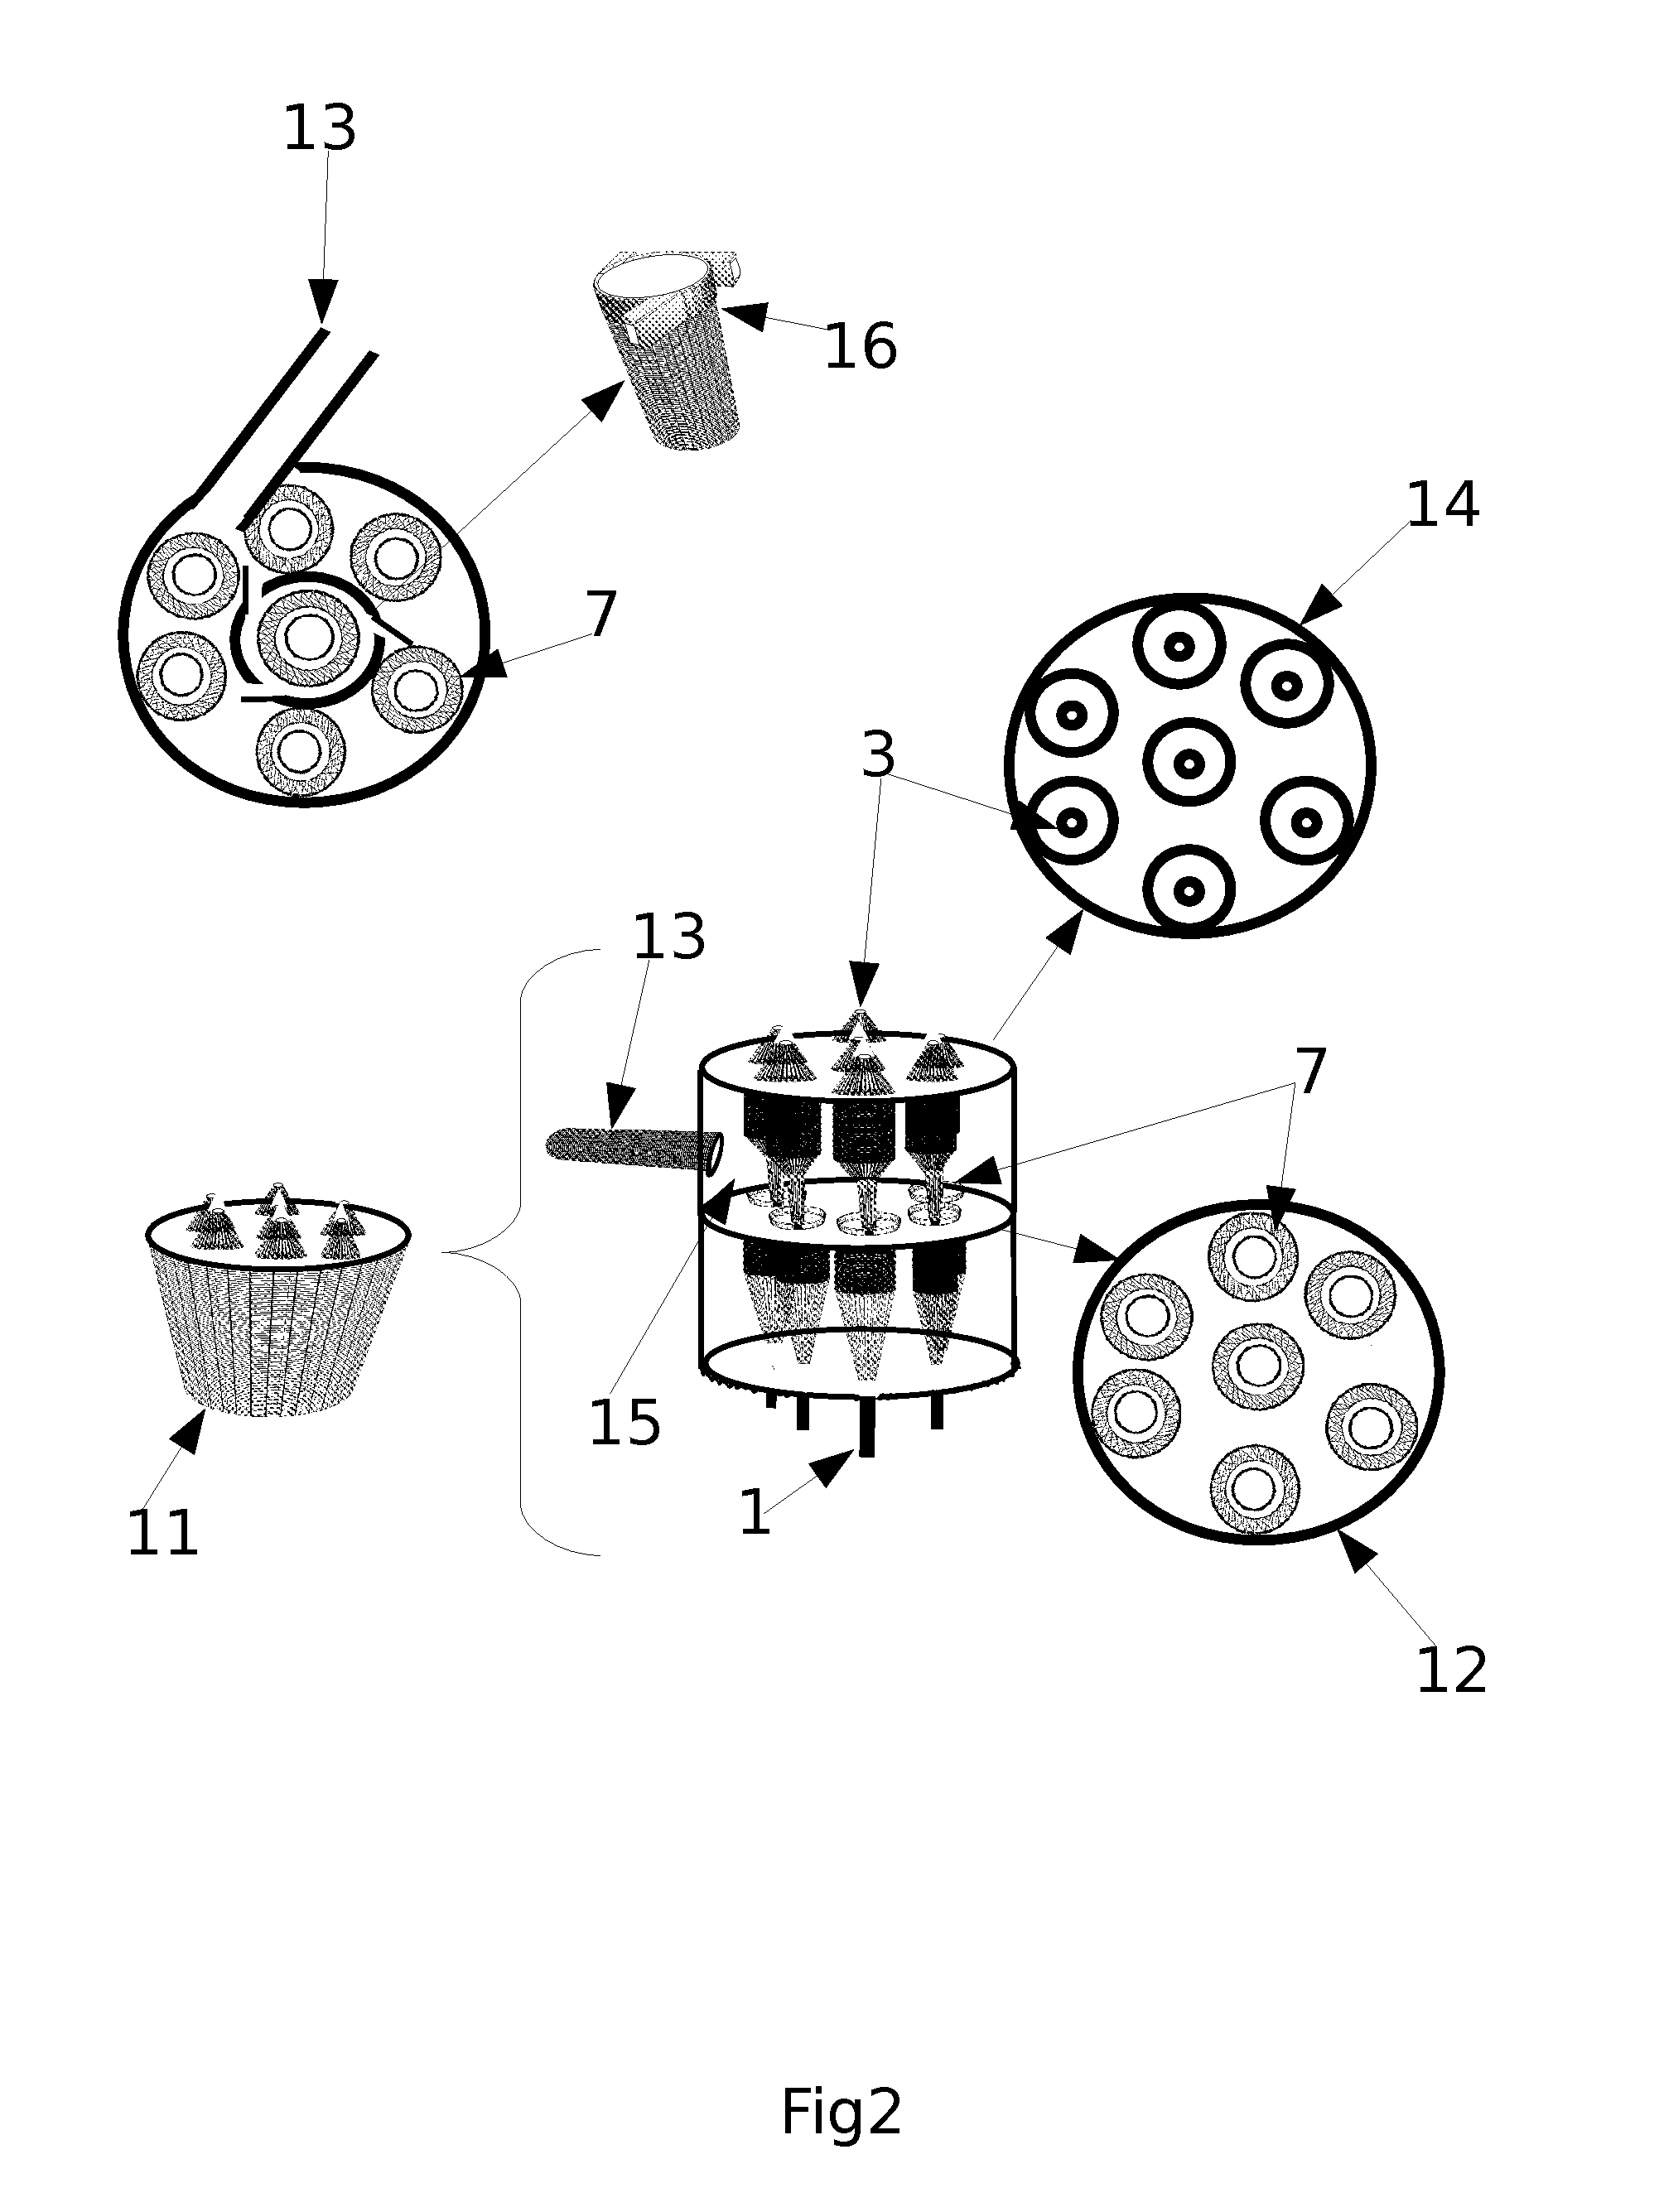 Method for the desalination or purification of water by distillation of a spray (spray pump)